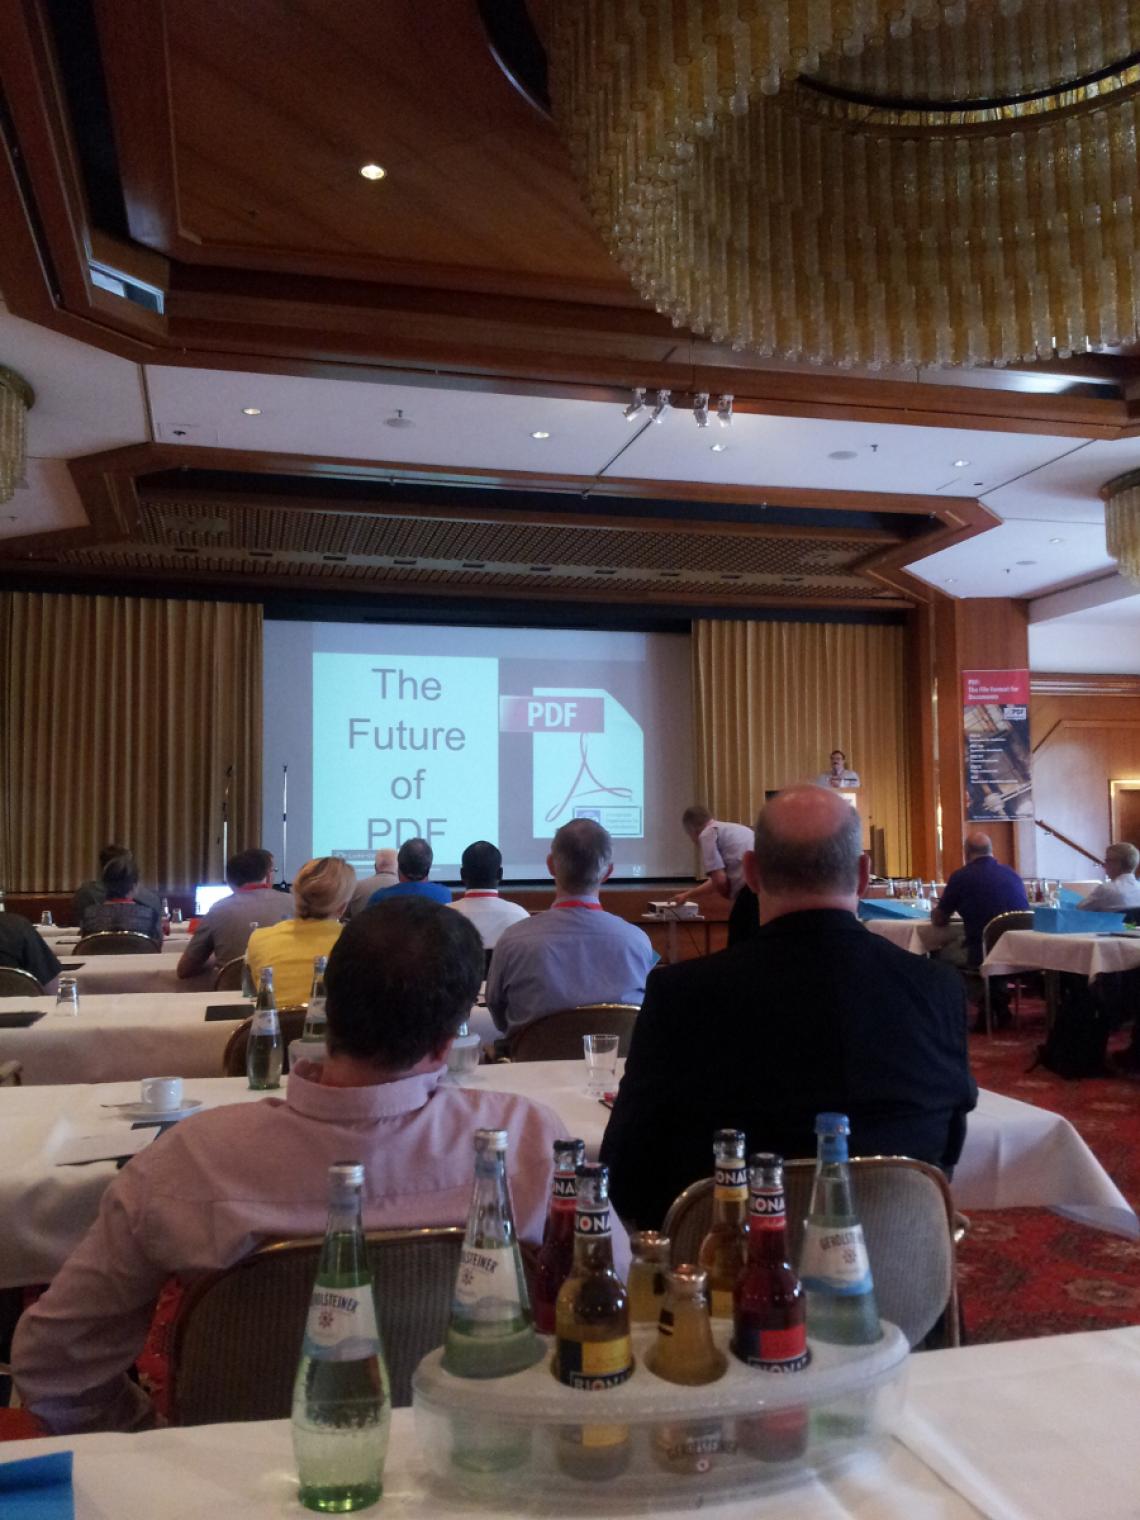 The Future of PDF, a talk at the PDF Conference in Königswinter